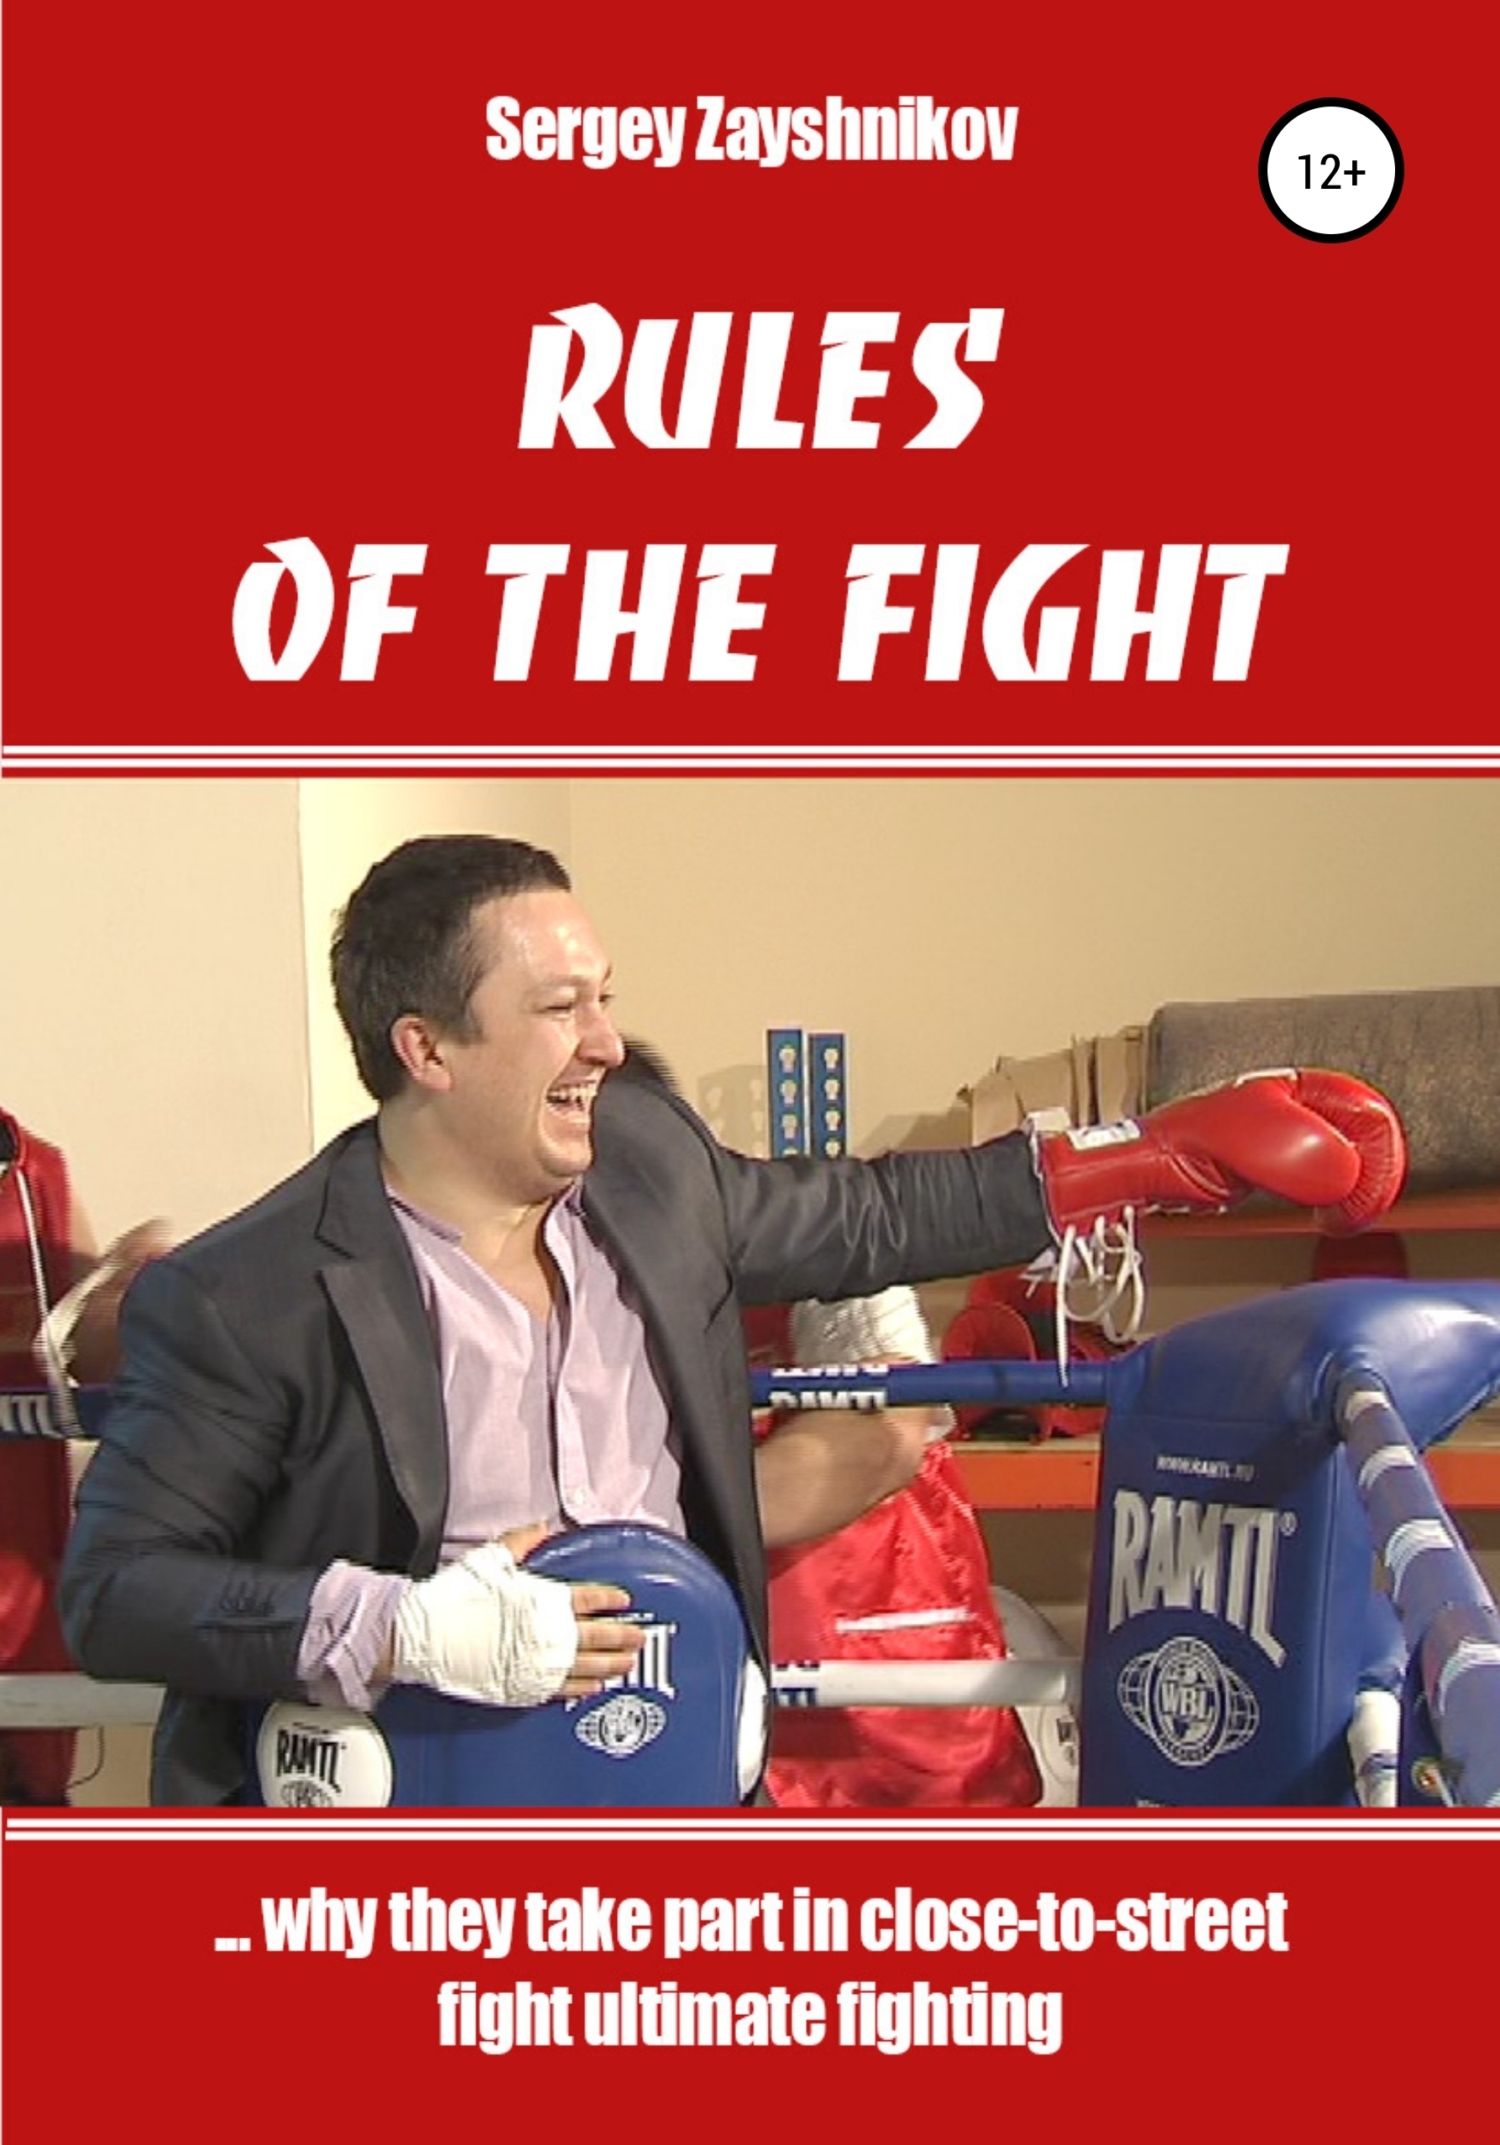 RULES OF THE FIGHT. «…why they take part in close-to-street fight ultimate fighting»